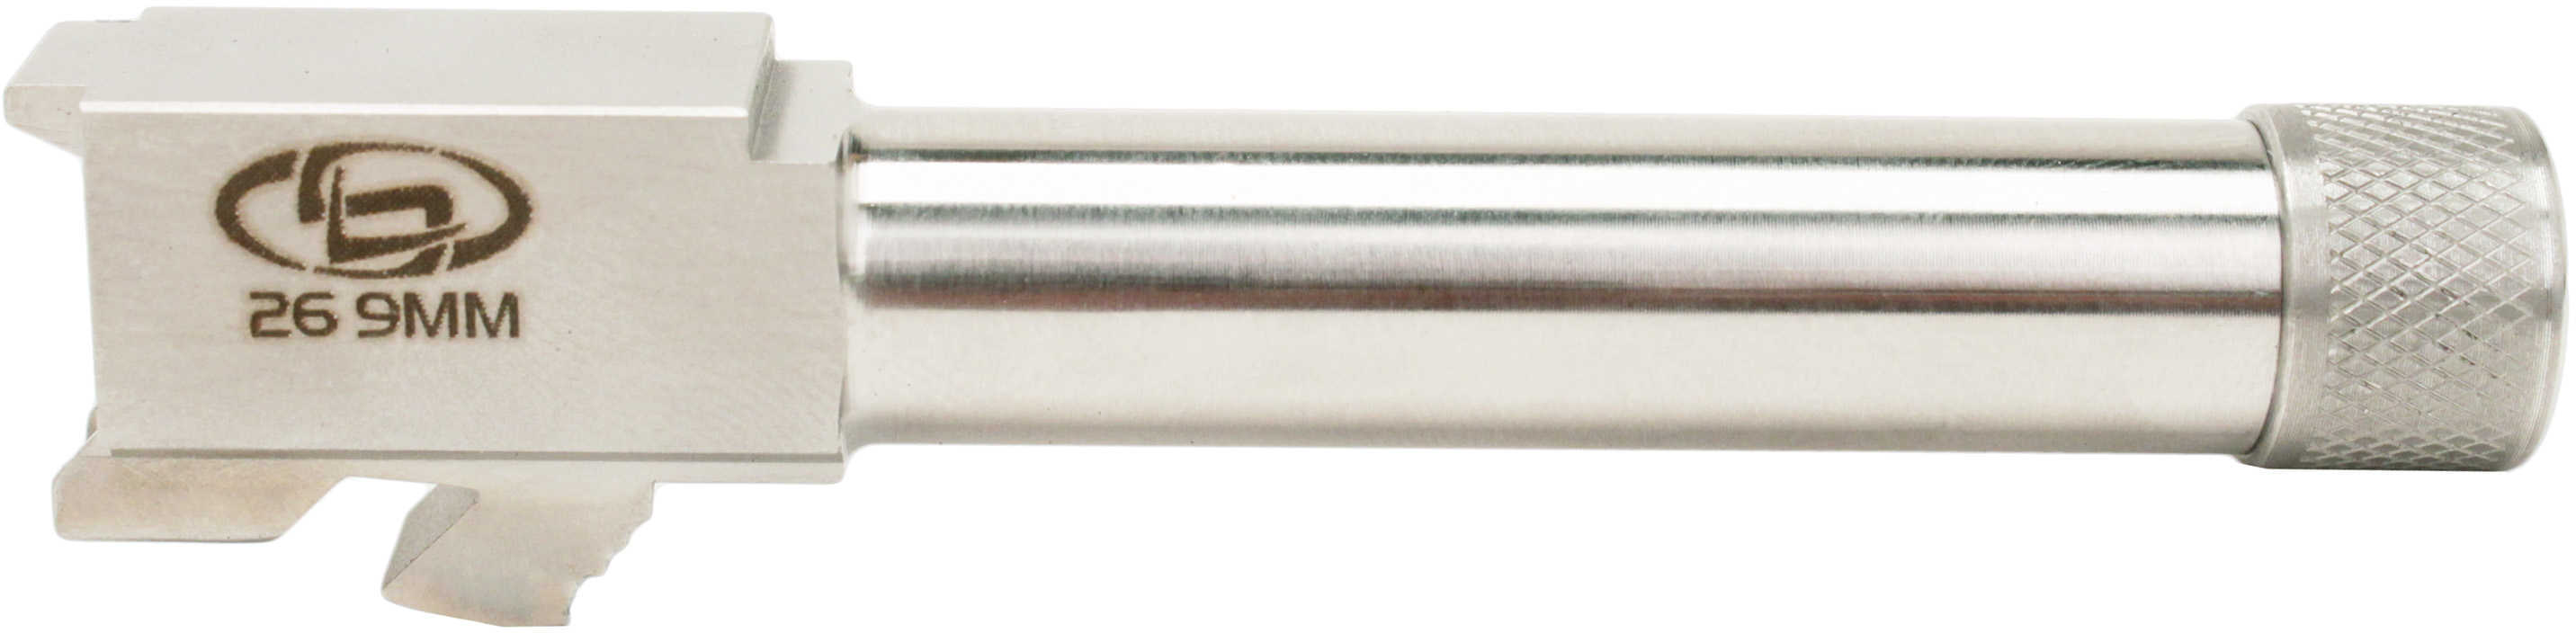 StormLake Barrels Lake 9MM 4.16" Stainless With Thread Protector Threaded 1/2-28 Glk 26 -AT GL-26-9MM-416-OP-01T